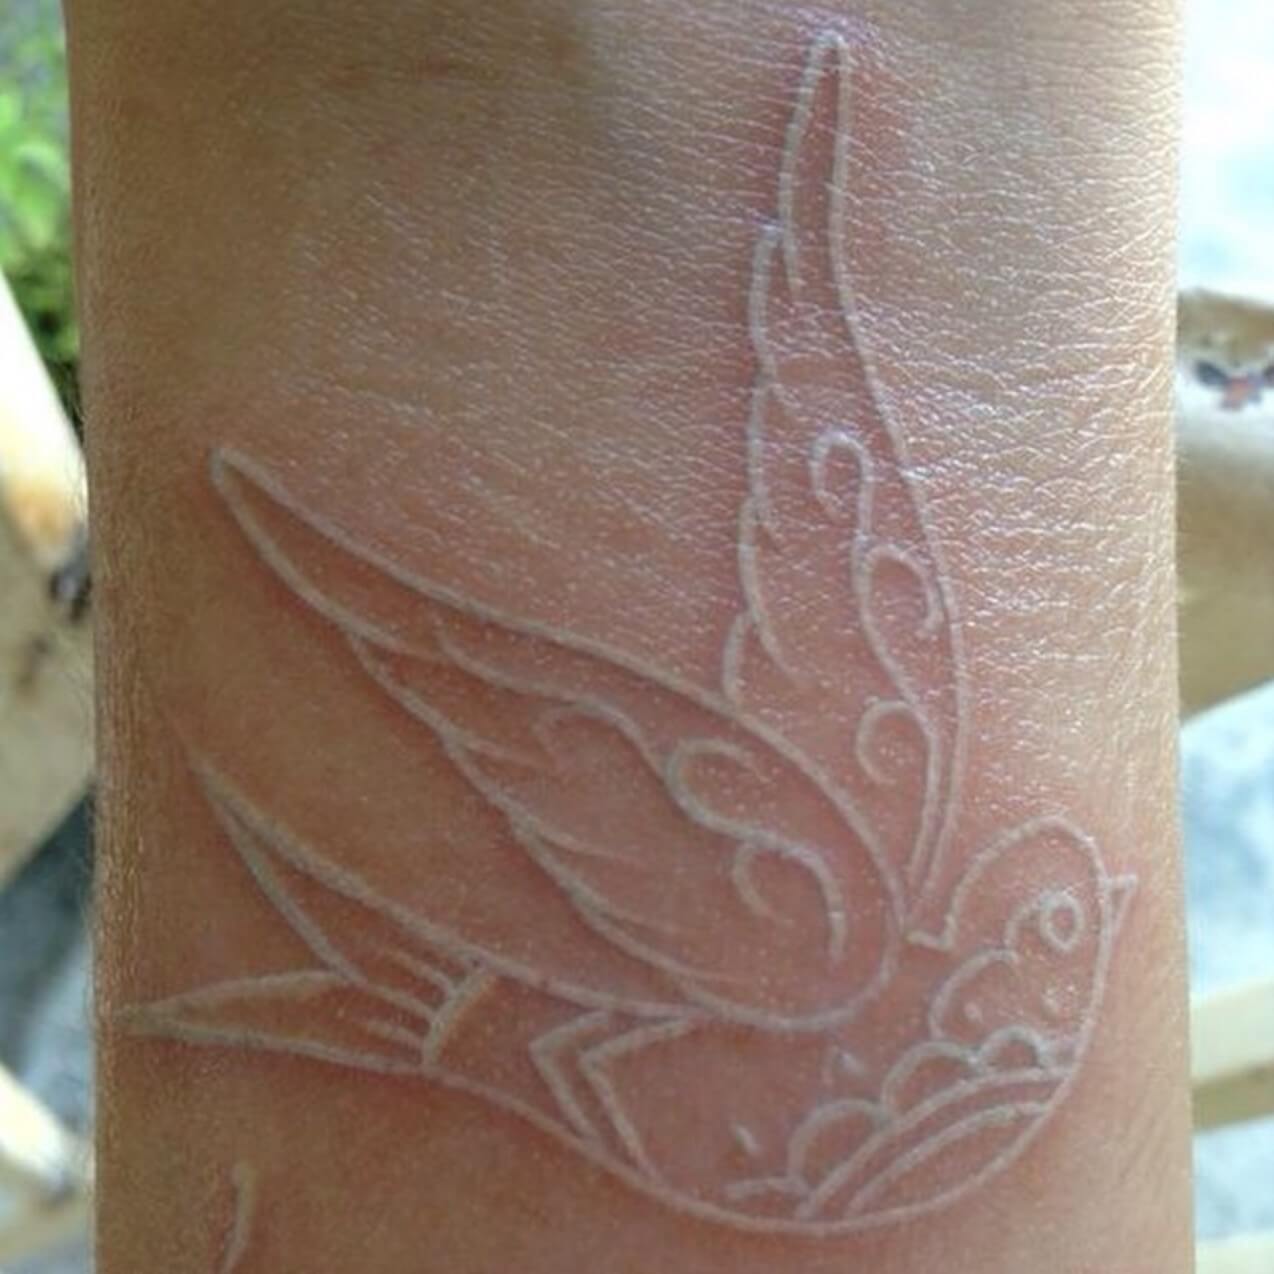 Bird tattoo made with white ink